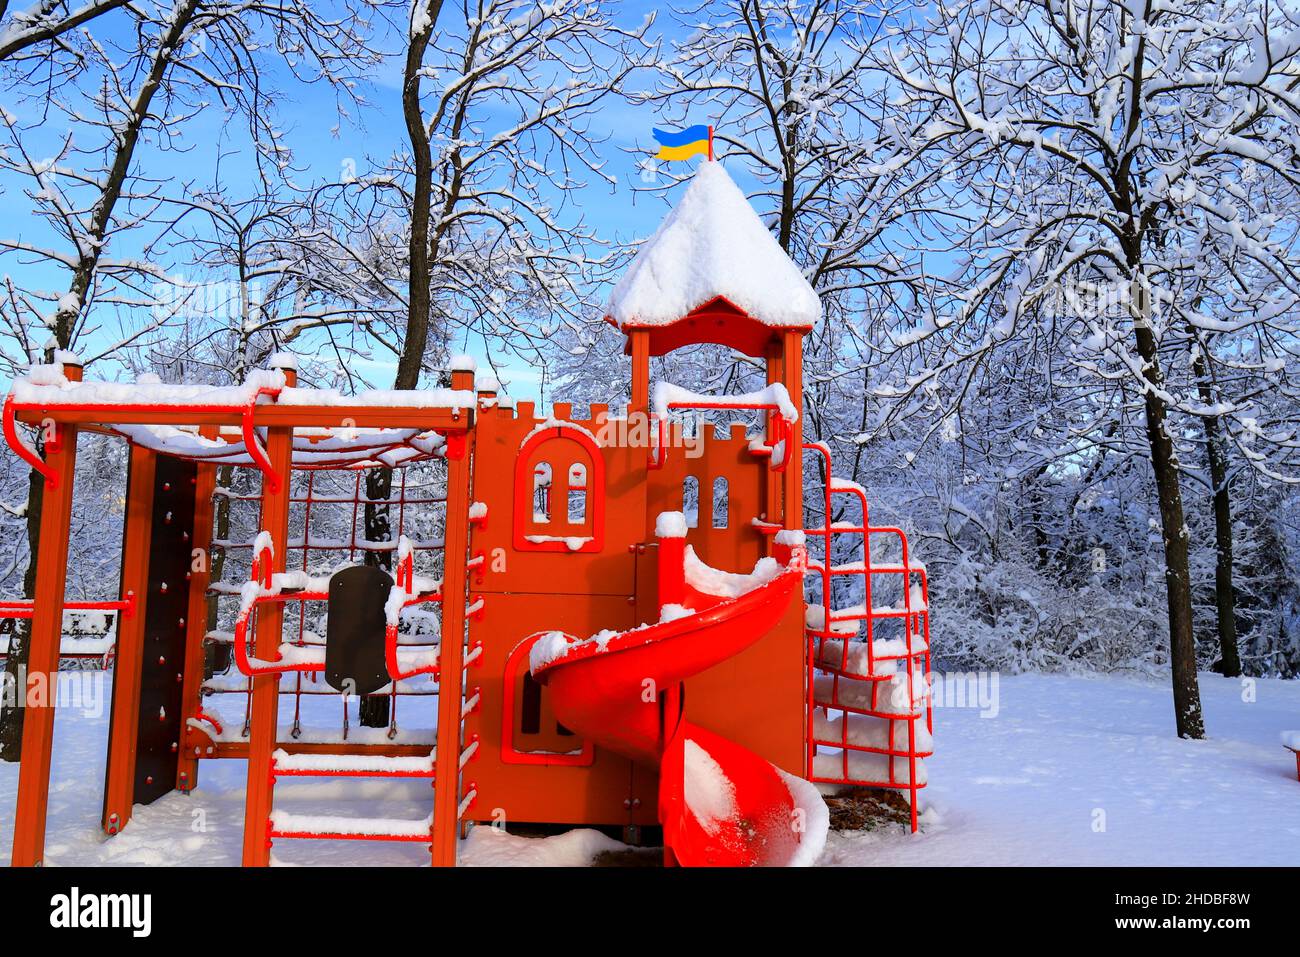 In the winter park, there is a red playground covered with snow. Children's slides and swings in winter. Dnipro city, Dnipropetrovsk, Ukraine Stock Photo